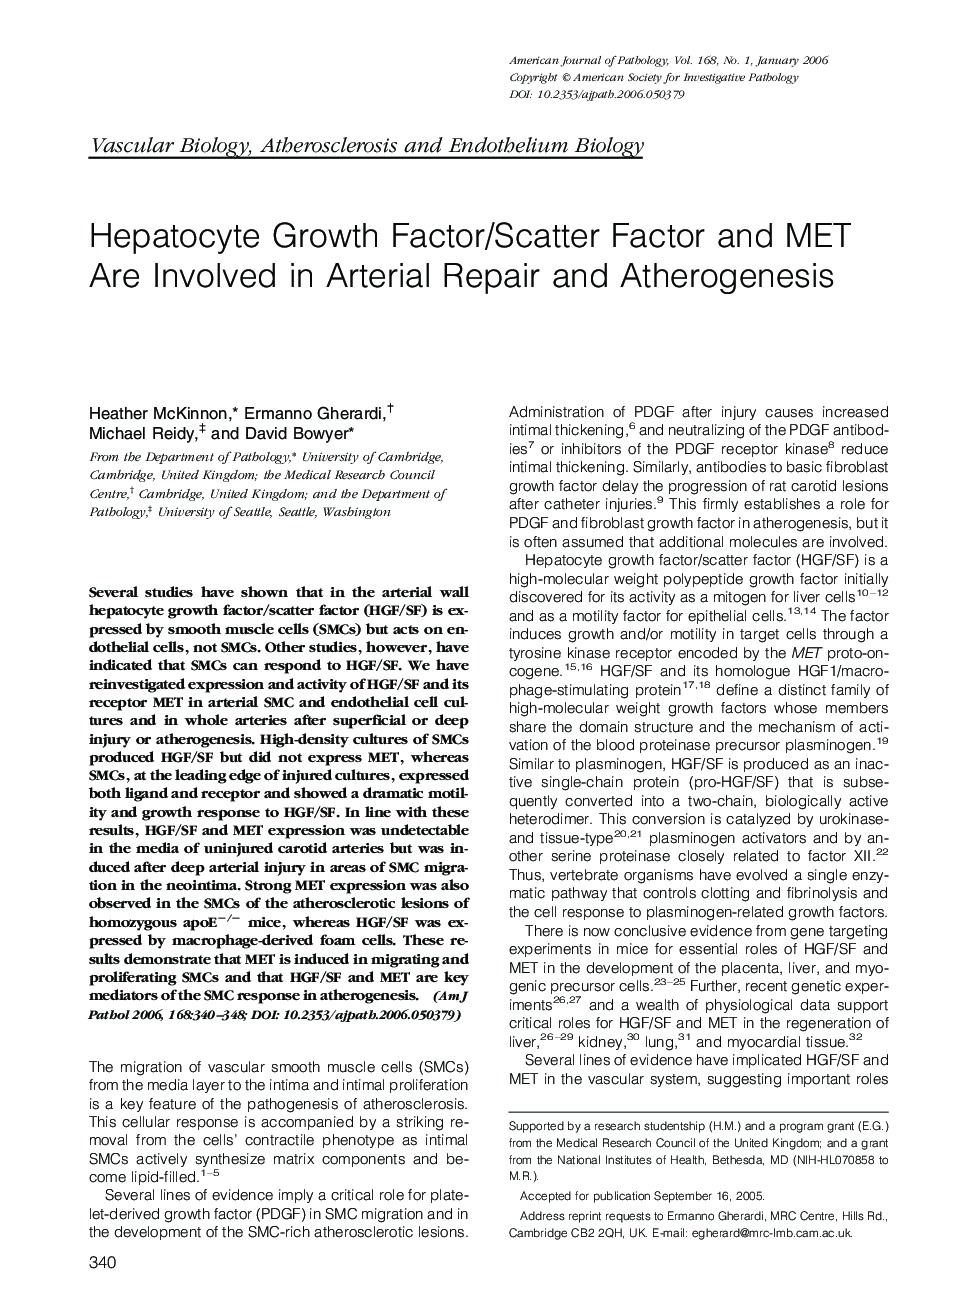 Hepatocyte Growth Factor/Scatter Factor and MET Are Involved in Arterial Repair and Atherogenesis